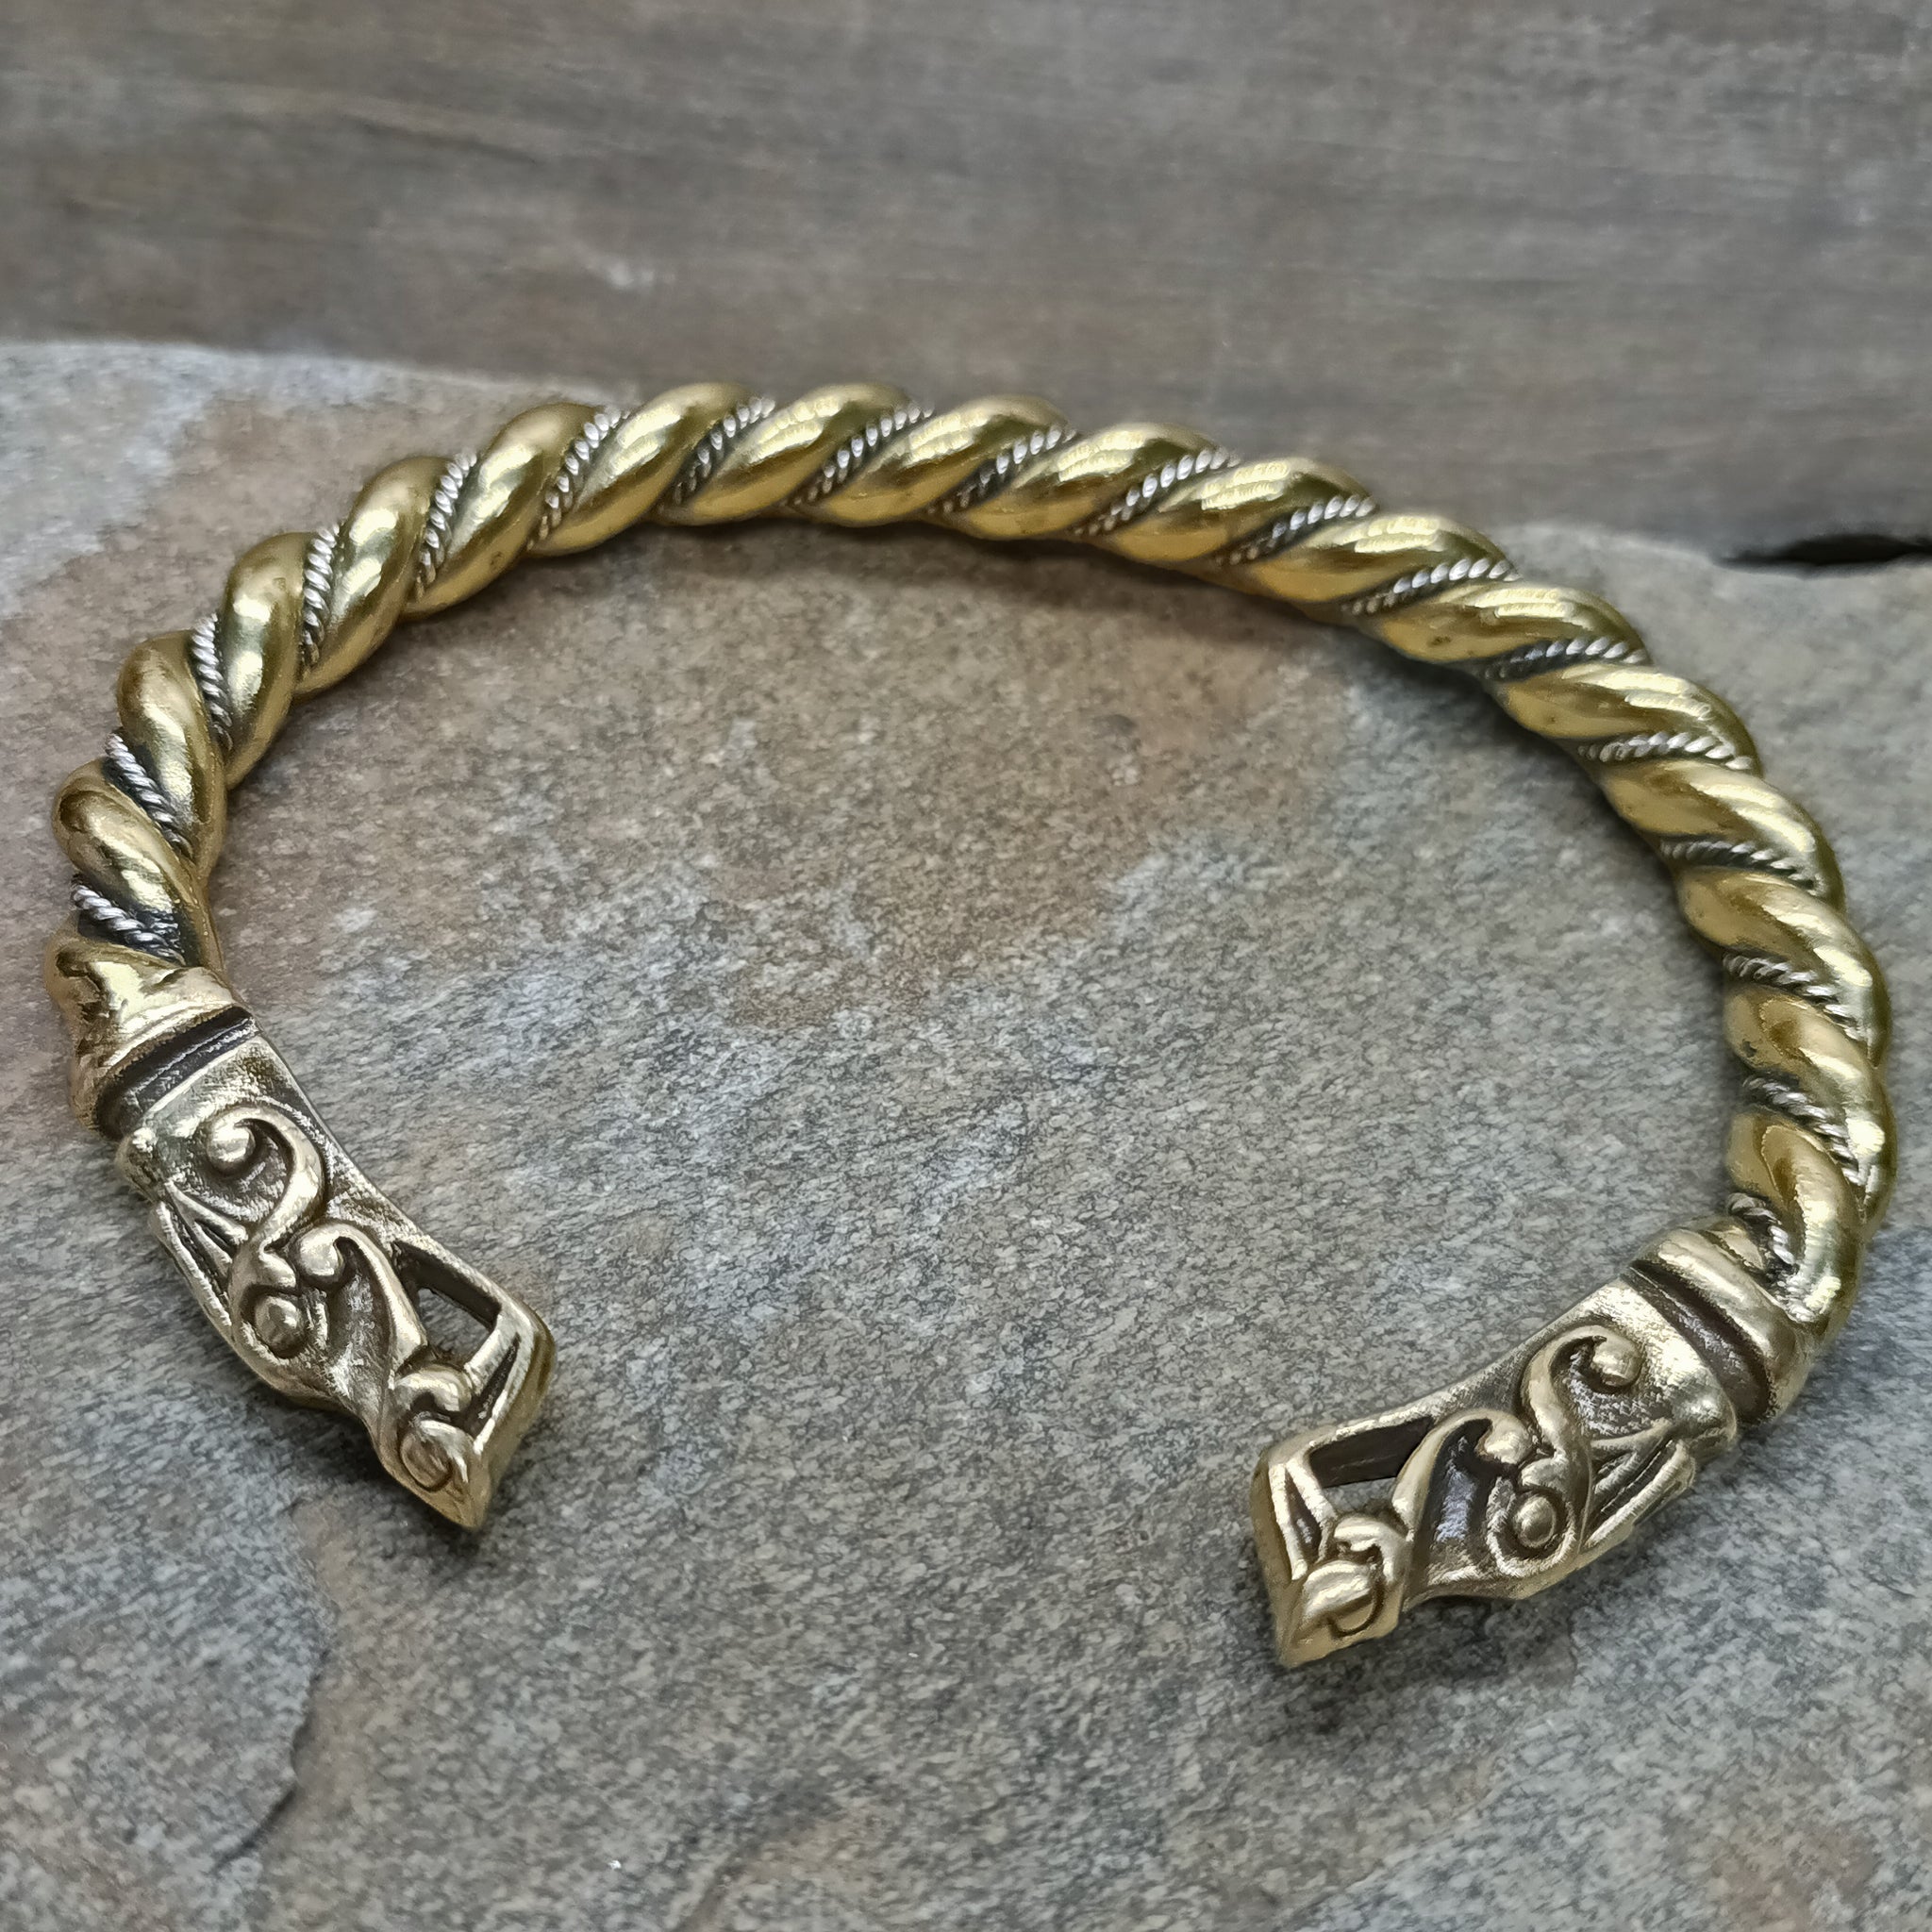 Twisted Bronze and Silver Bracelet With Gotlandic Dragon Heads on Rock - Front Angle View